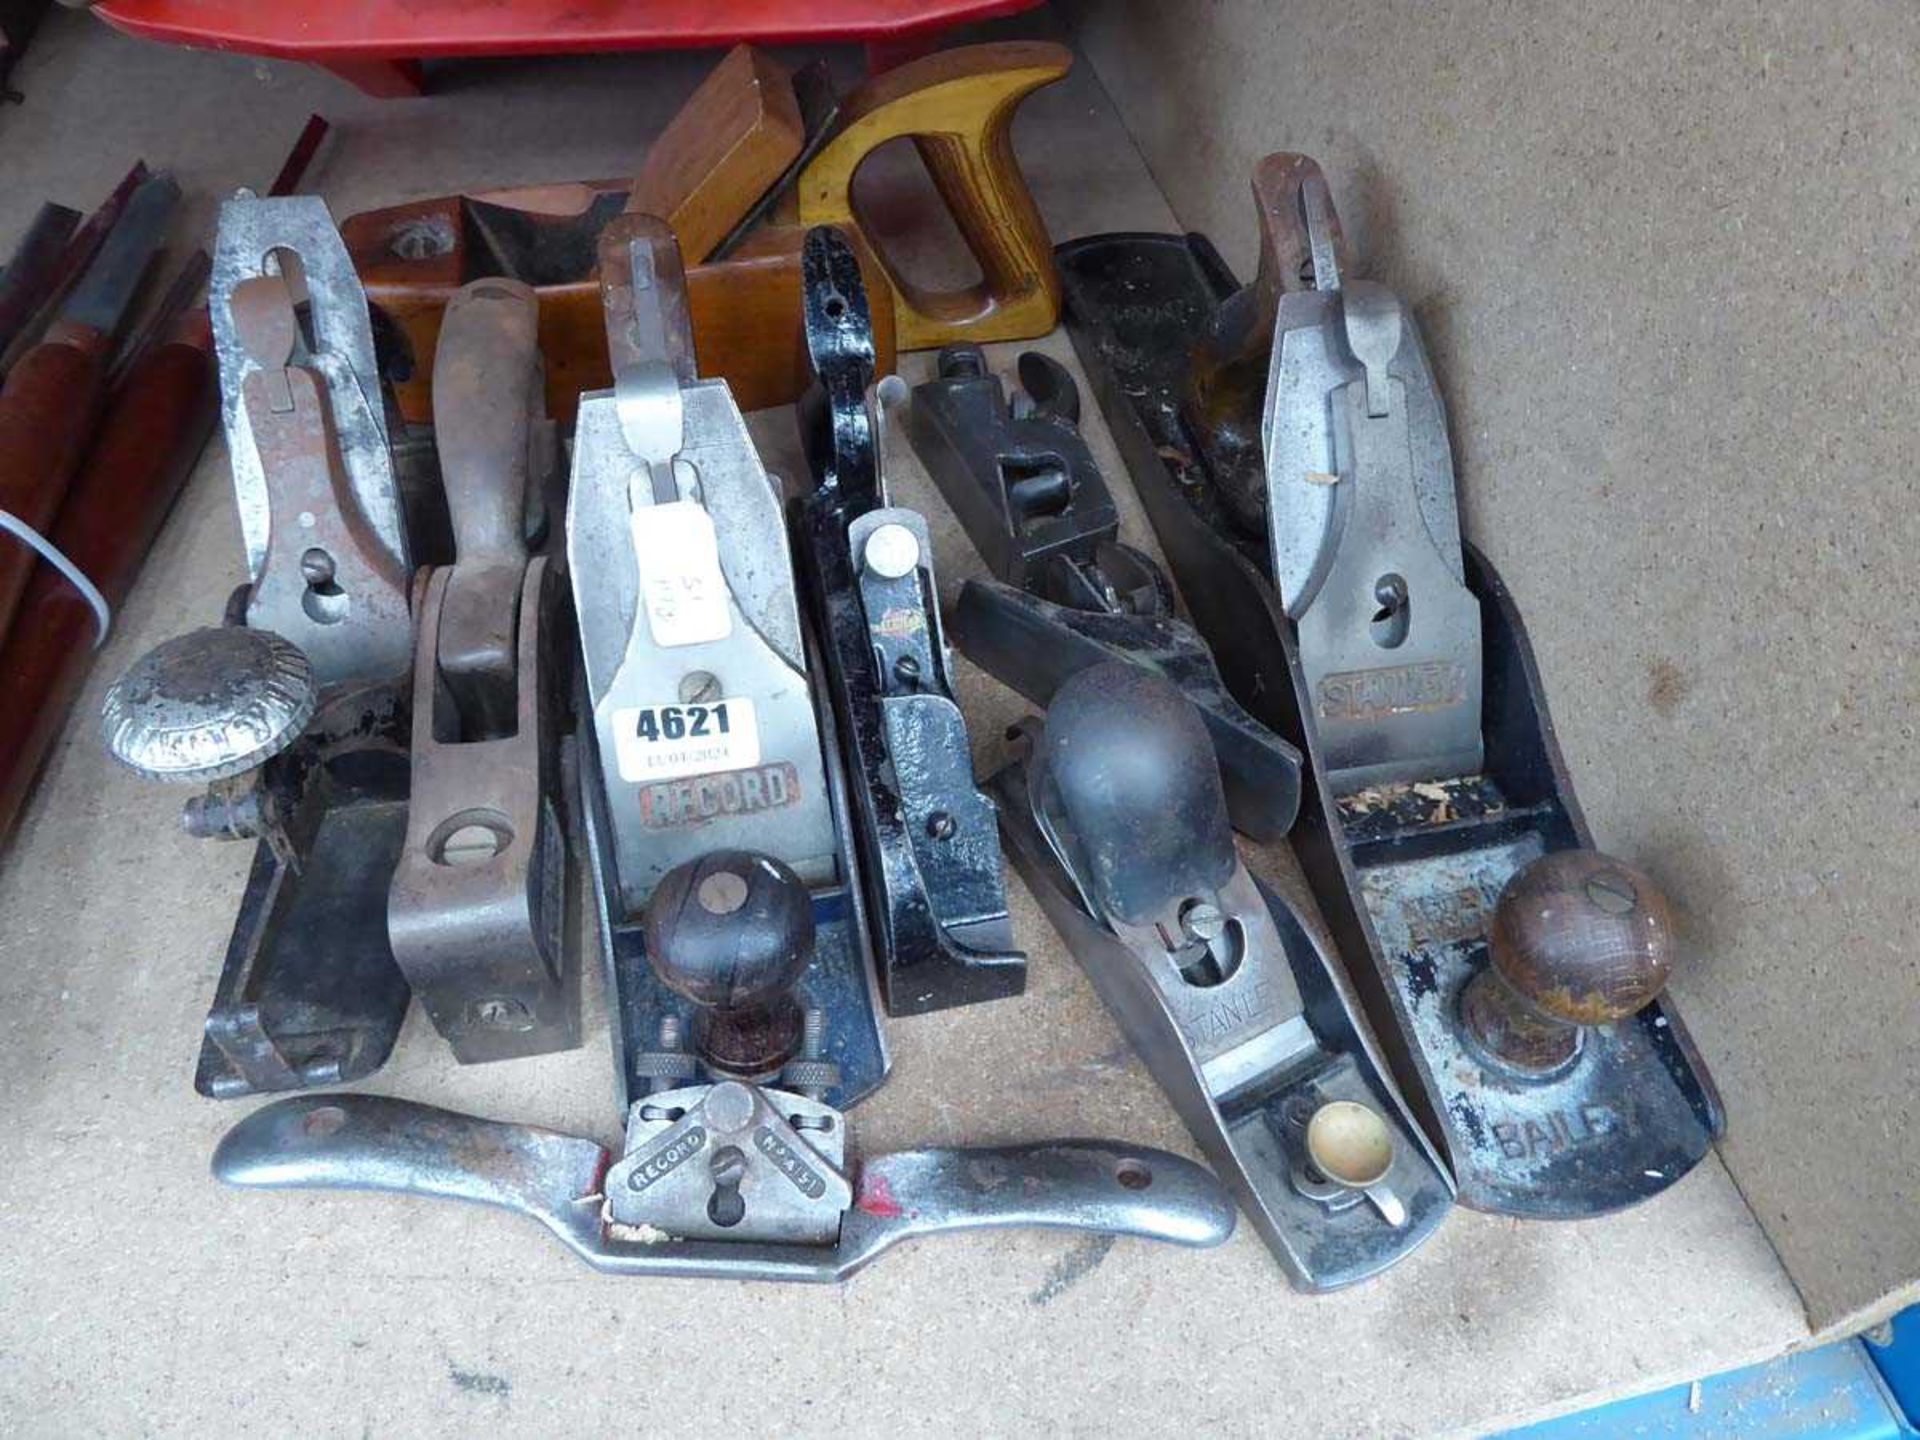 Assortment of various woodworking planes inc. a compass plane